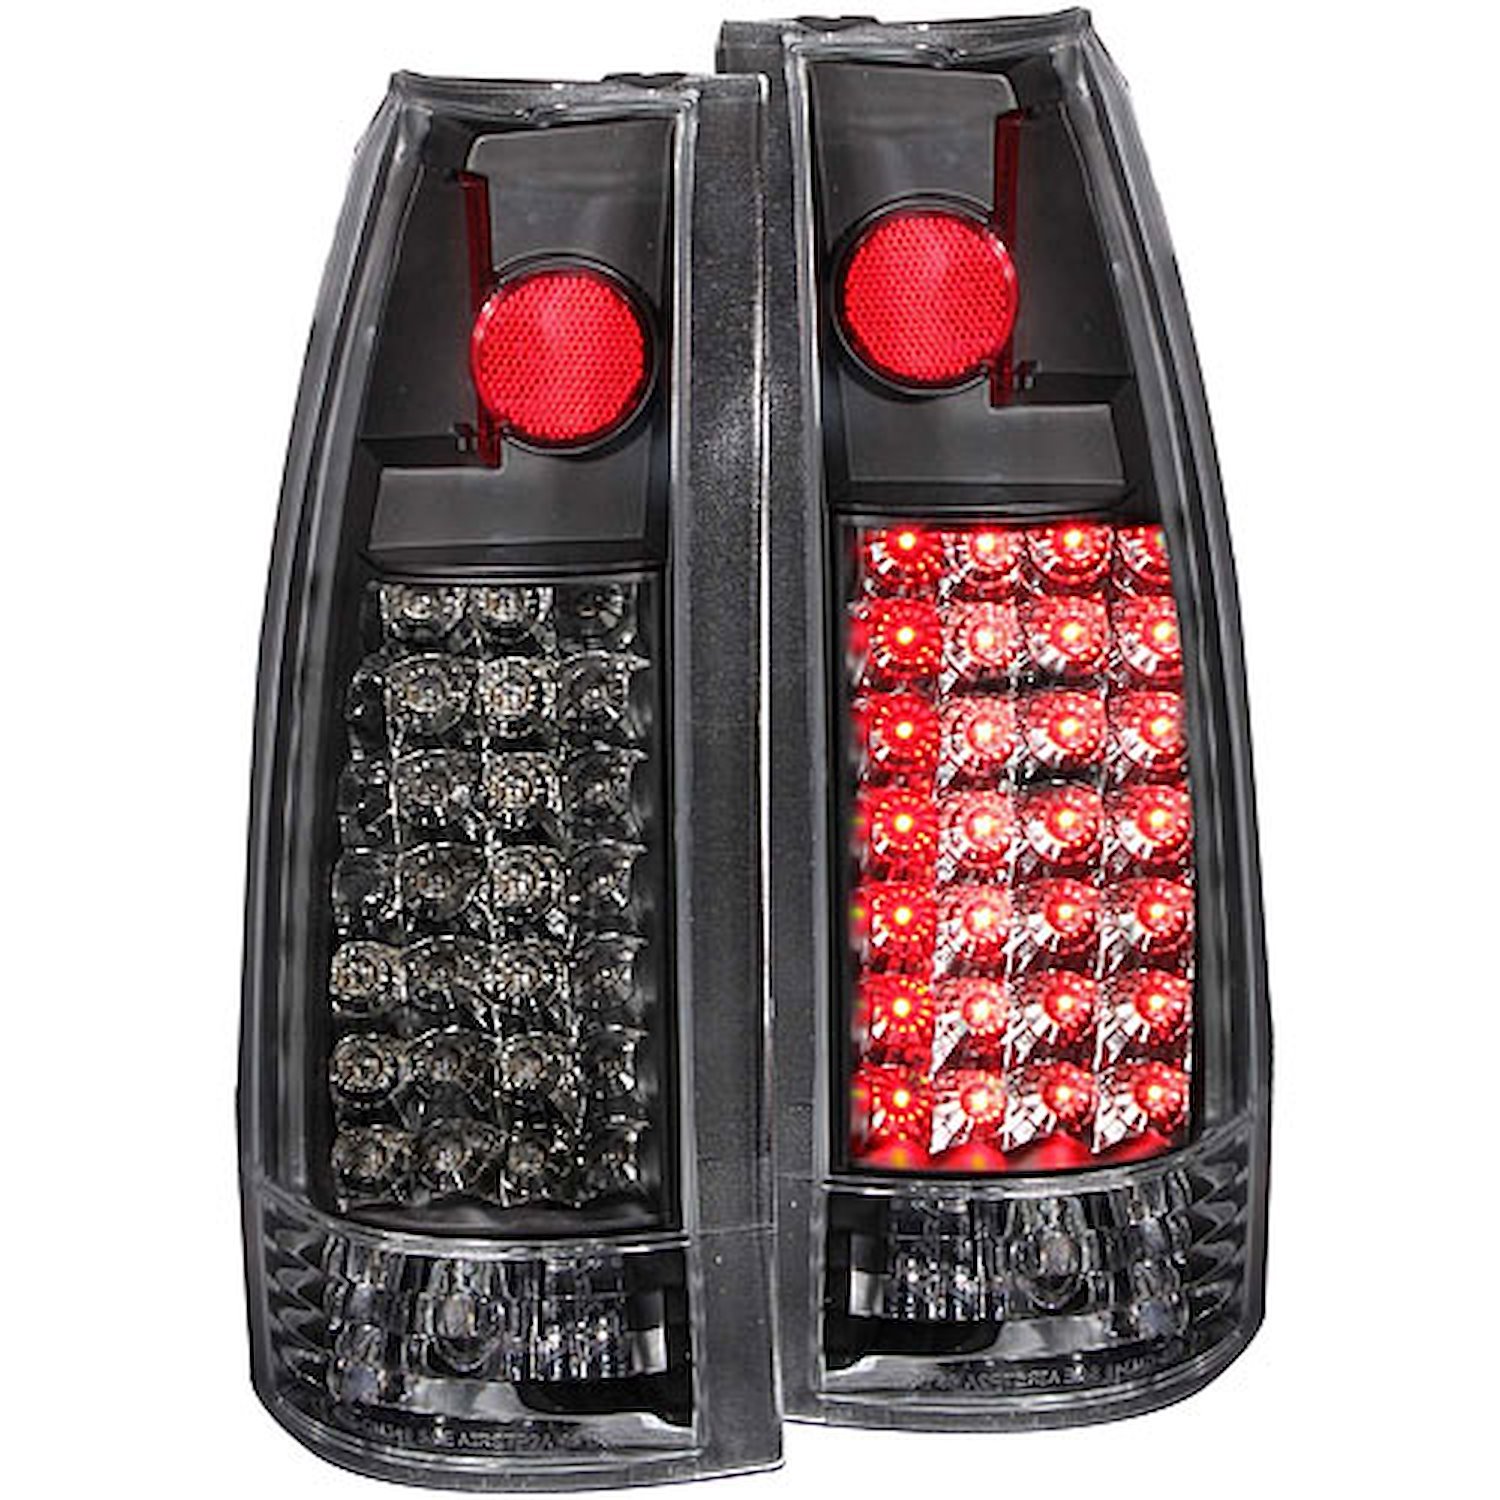 1988-1998 Chevy/GMC Full-Size Truck LED Taillights